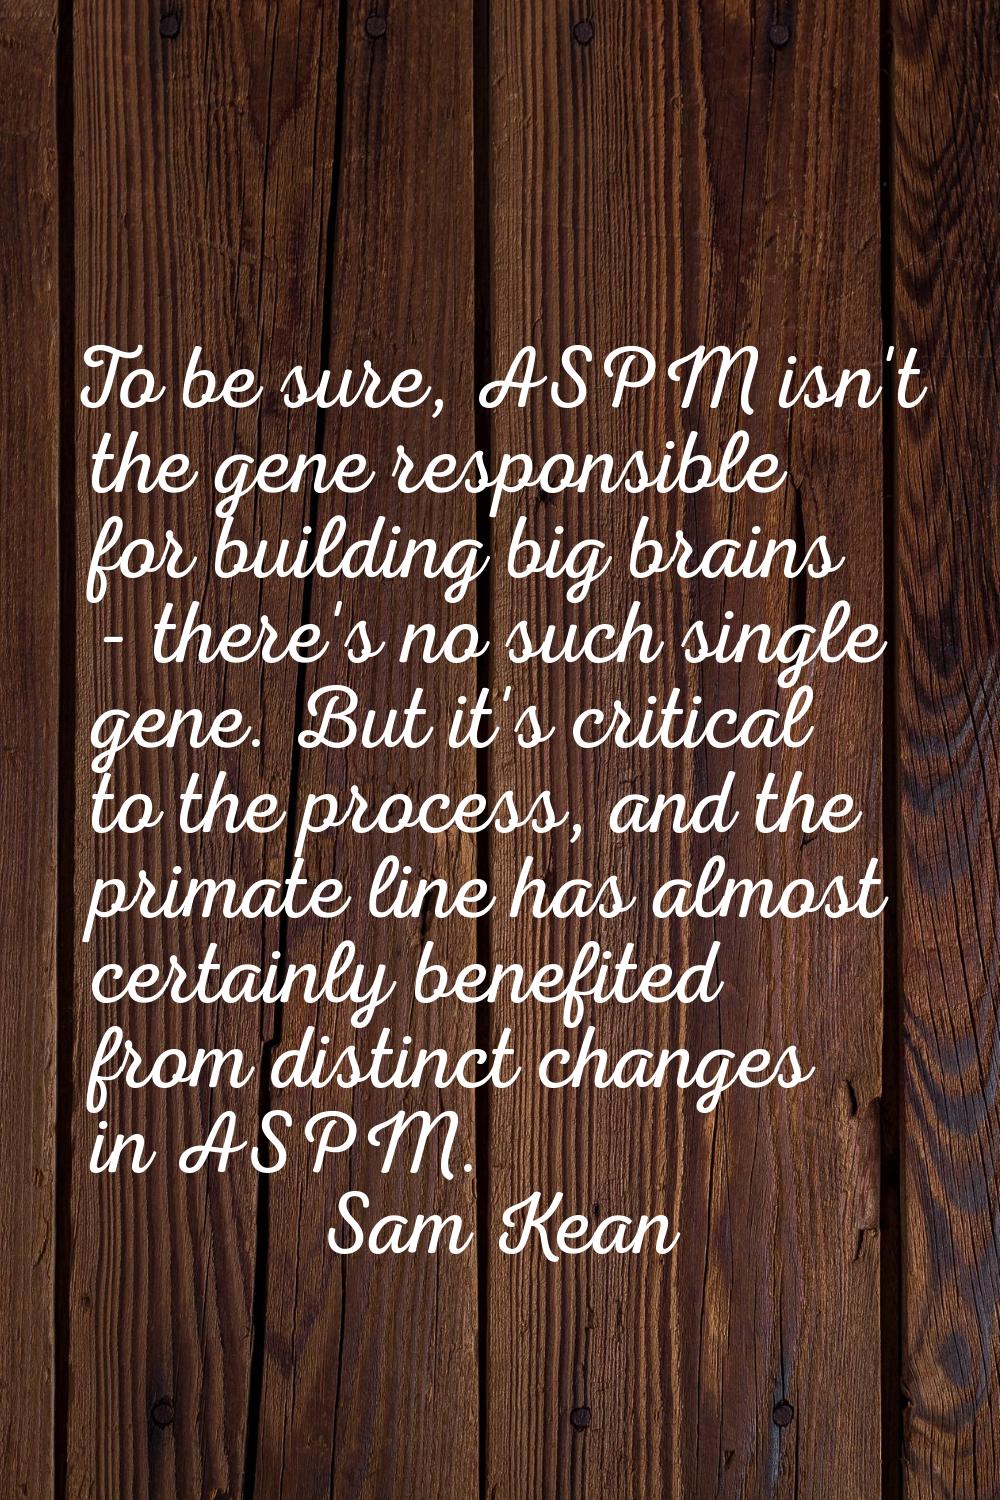 To be sure, ASPM isn't the gene responsible for building big brains - there's no such single gene. 